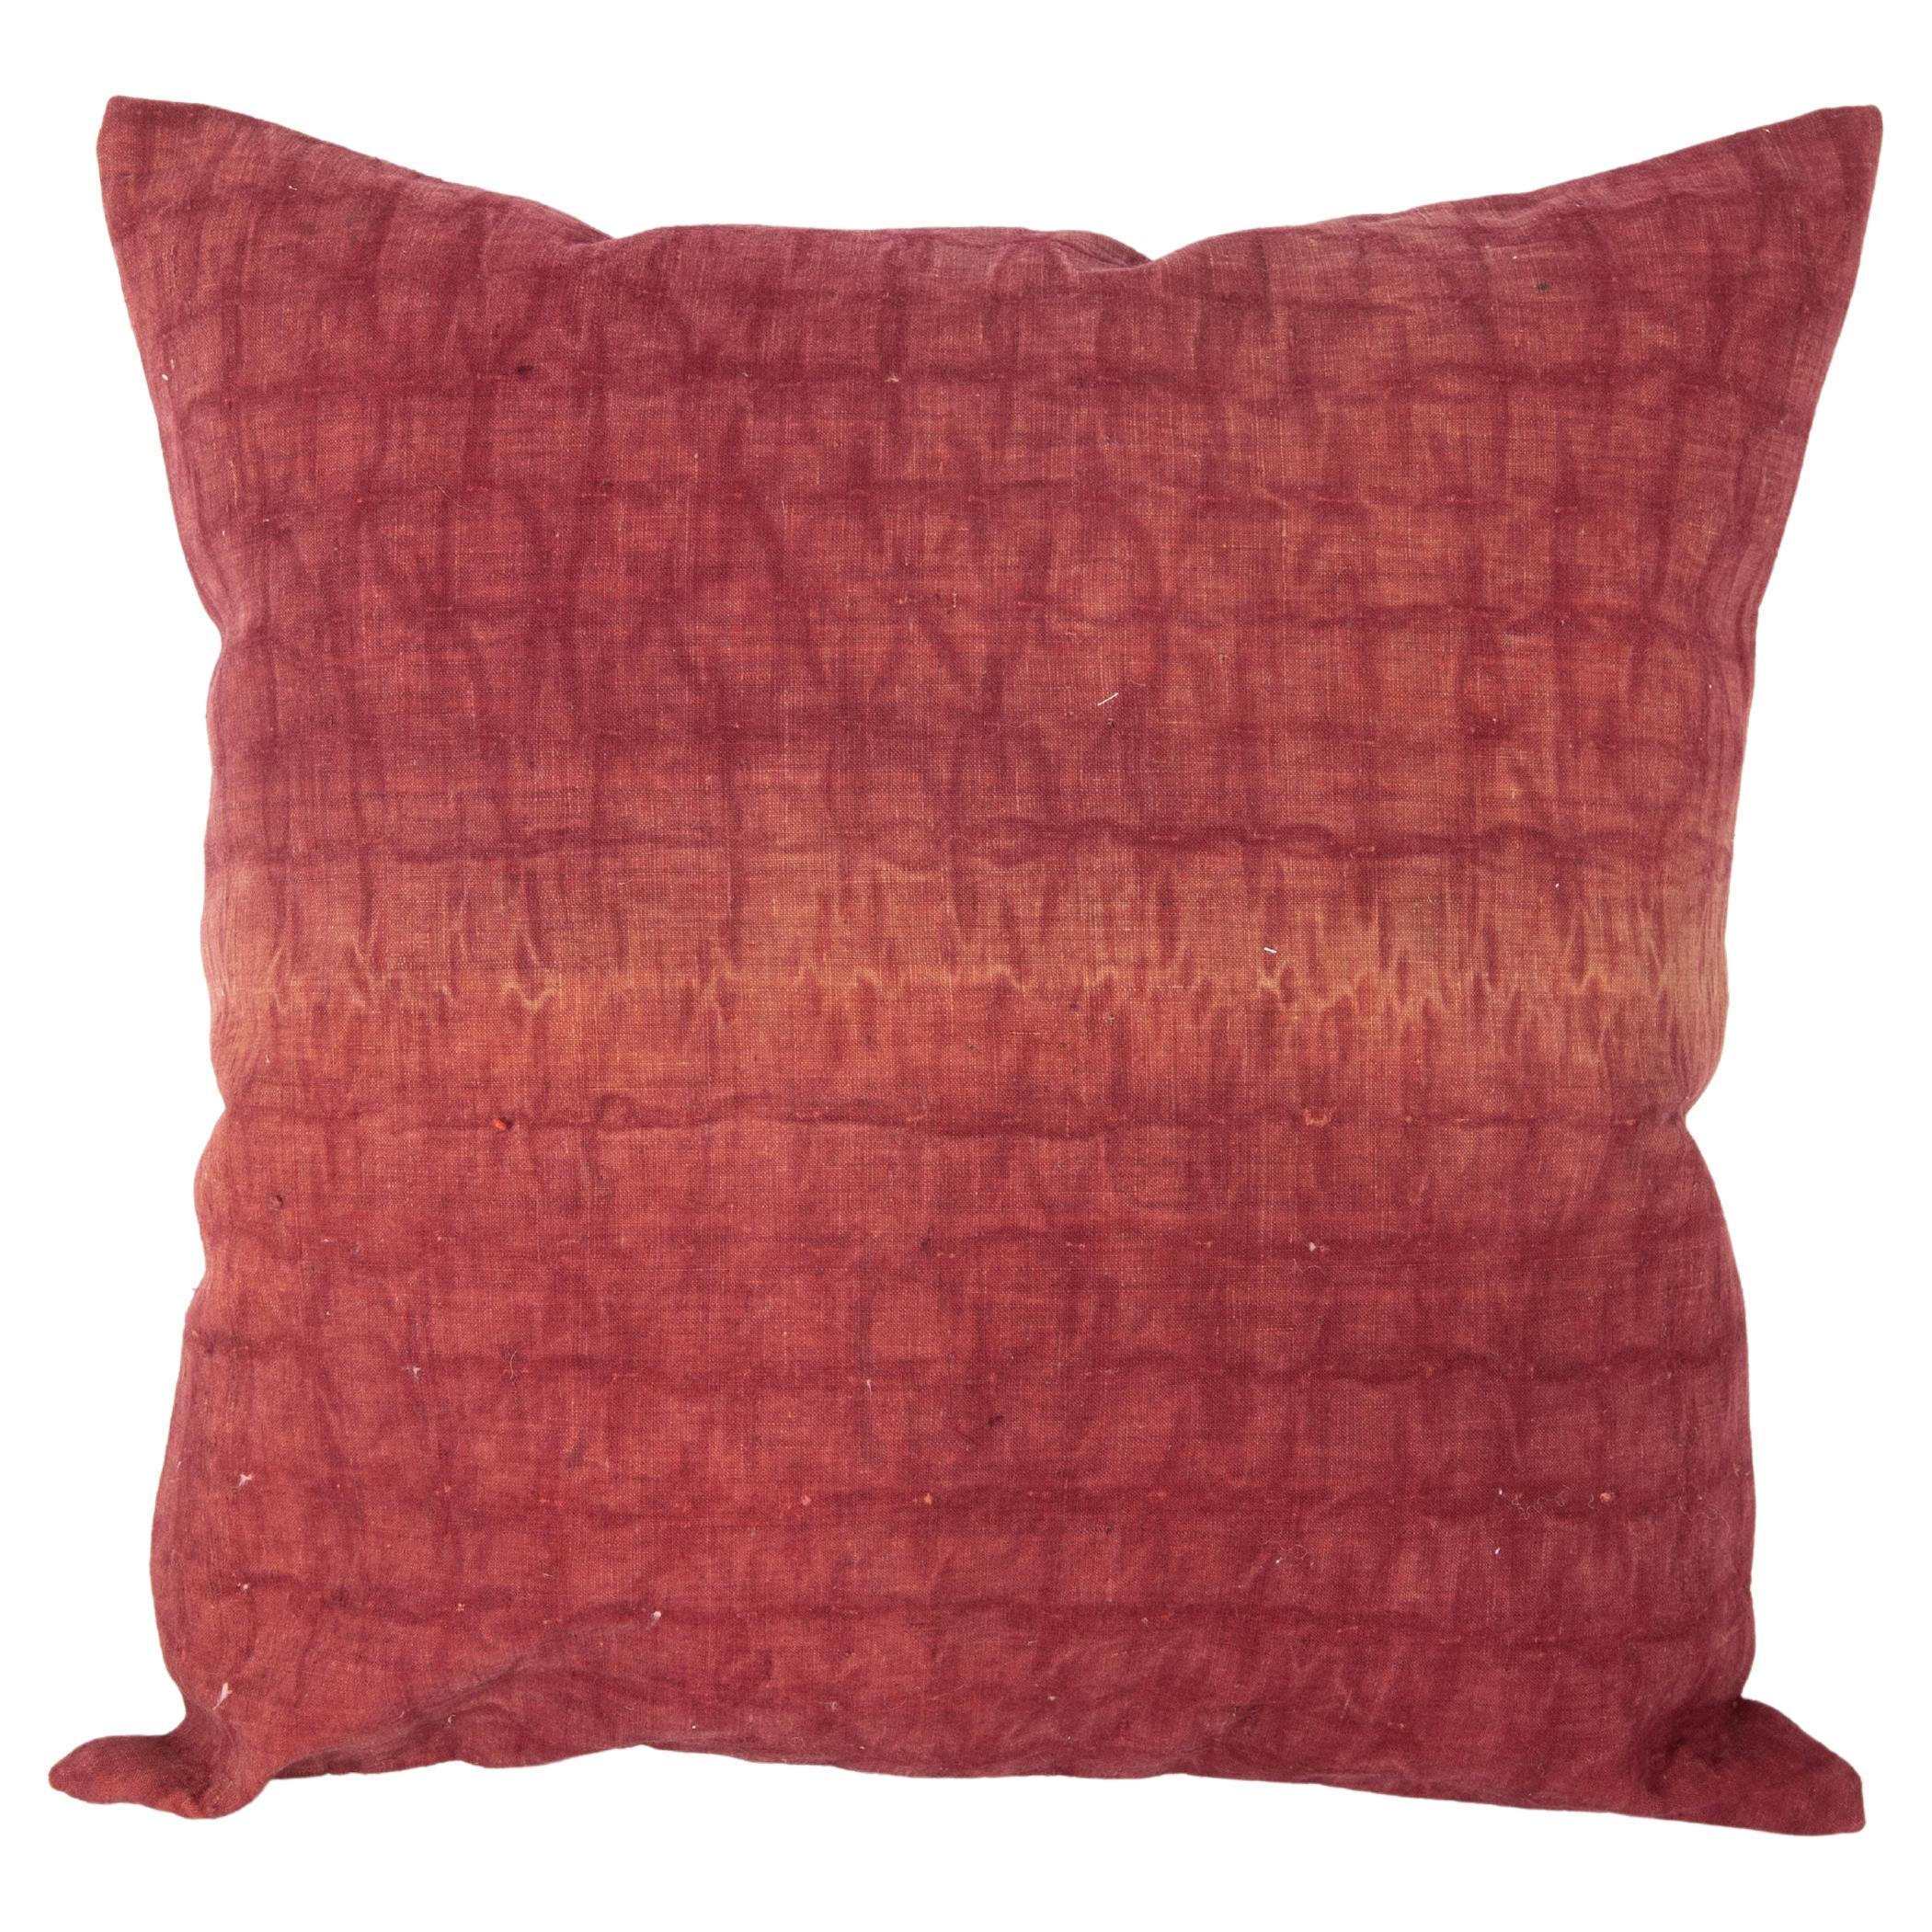 Madder Red Pillow Cover Made from an Early 20th C. Quilt Top, Turkey For Sale